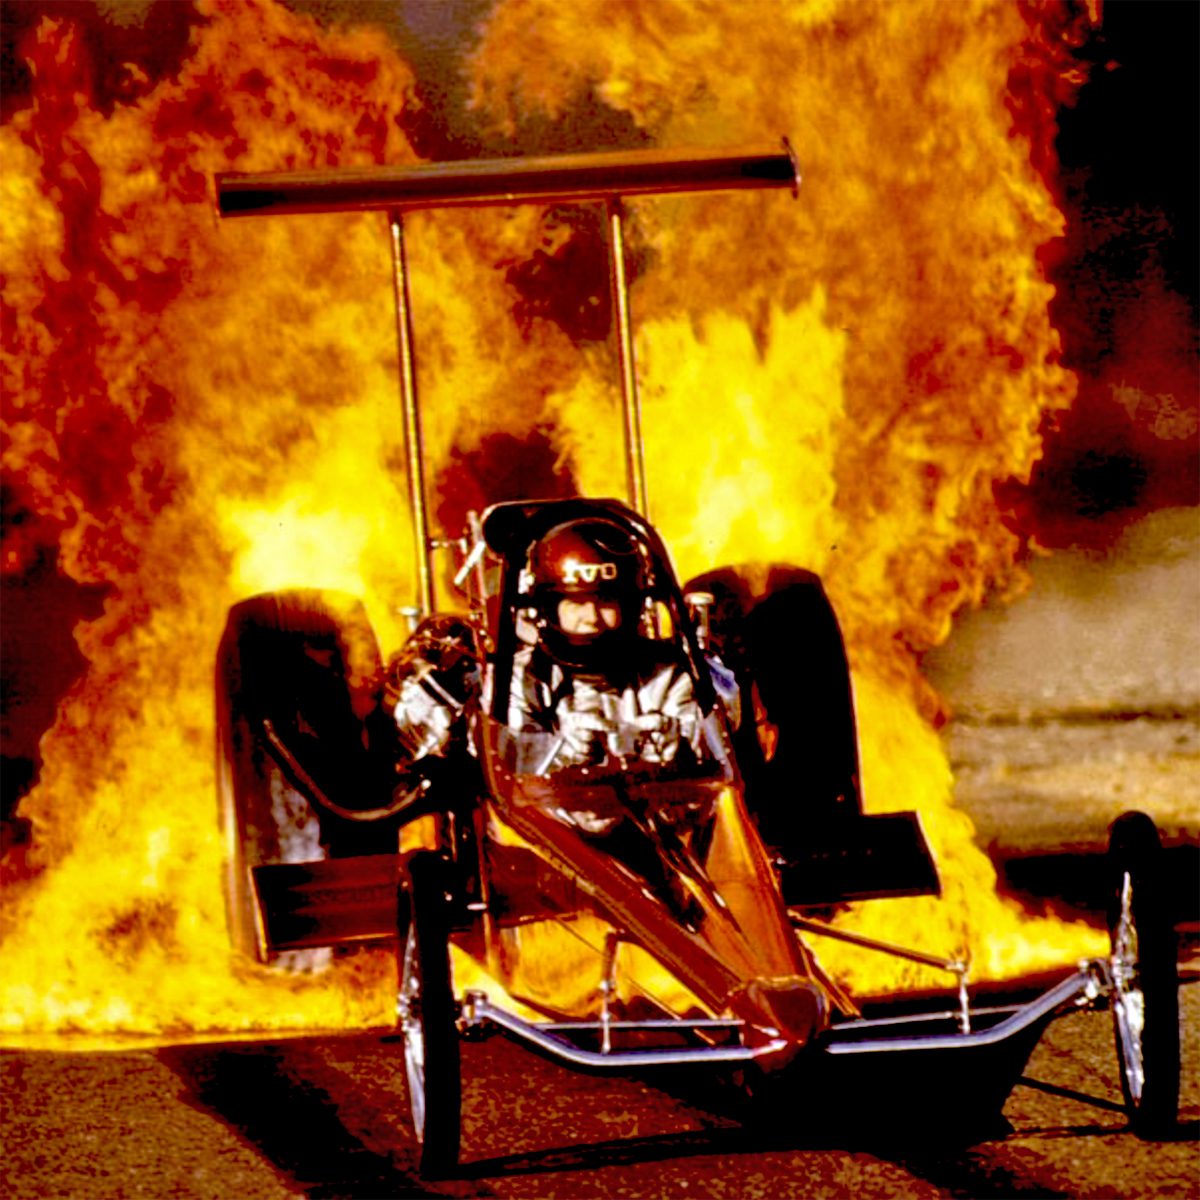 TV Tommy Ivo fire burnout, dragster fire burnout